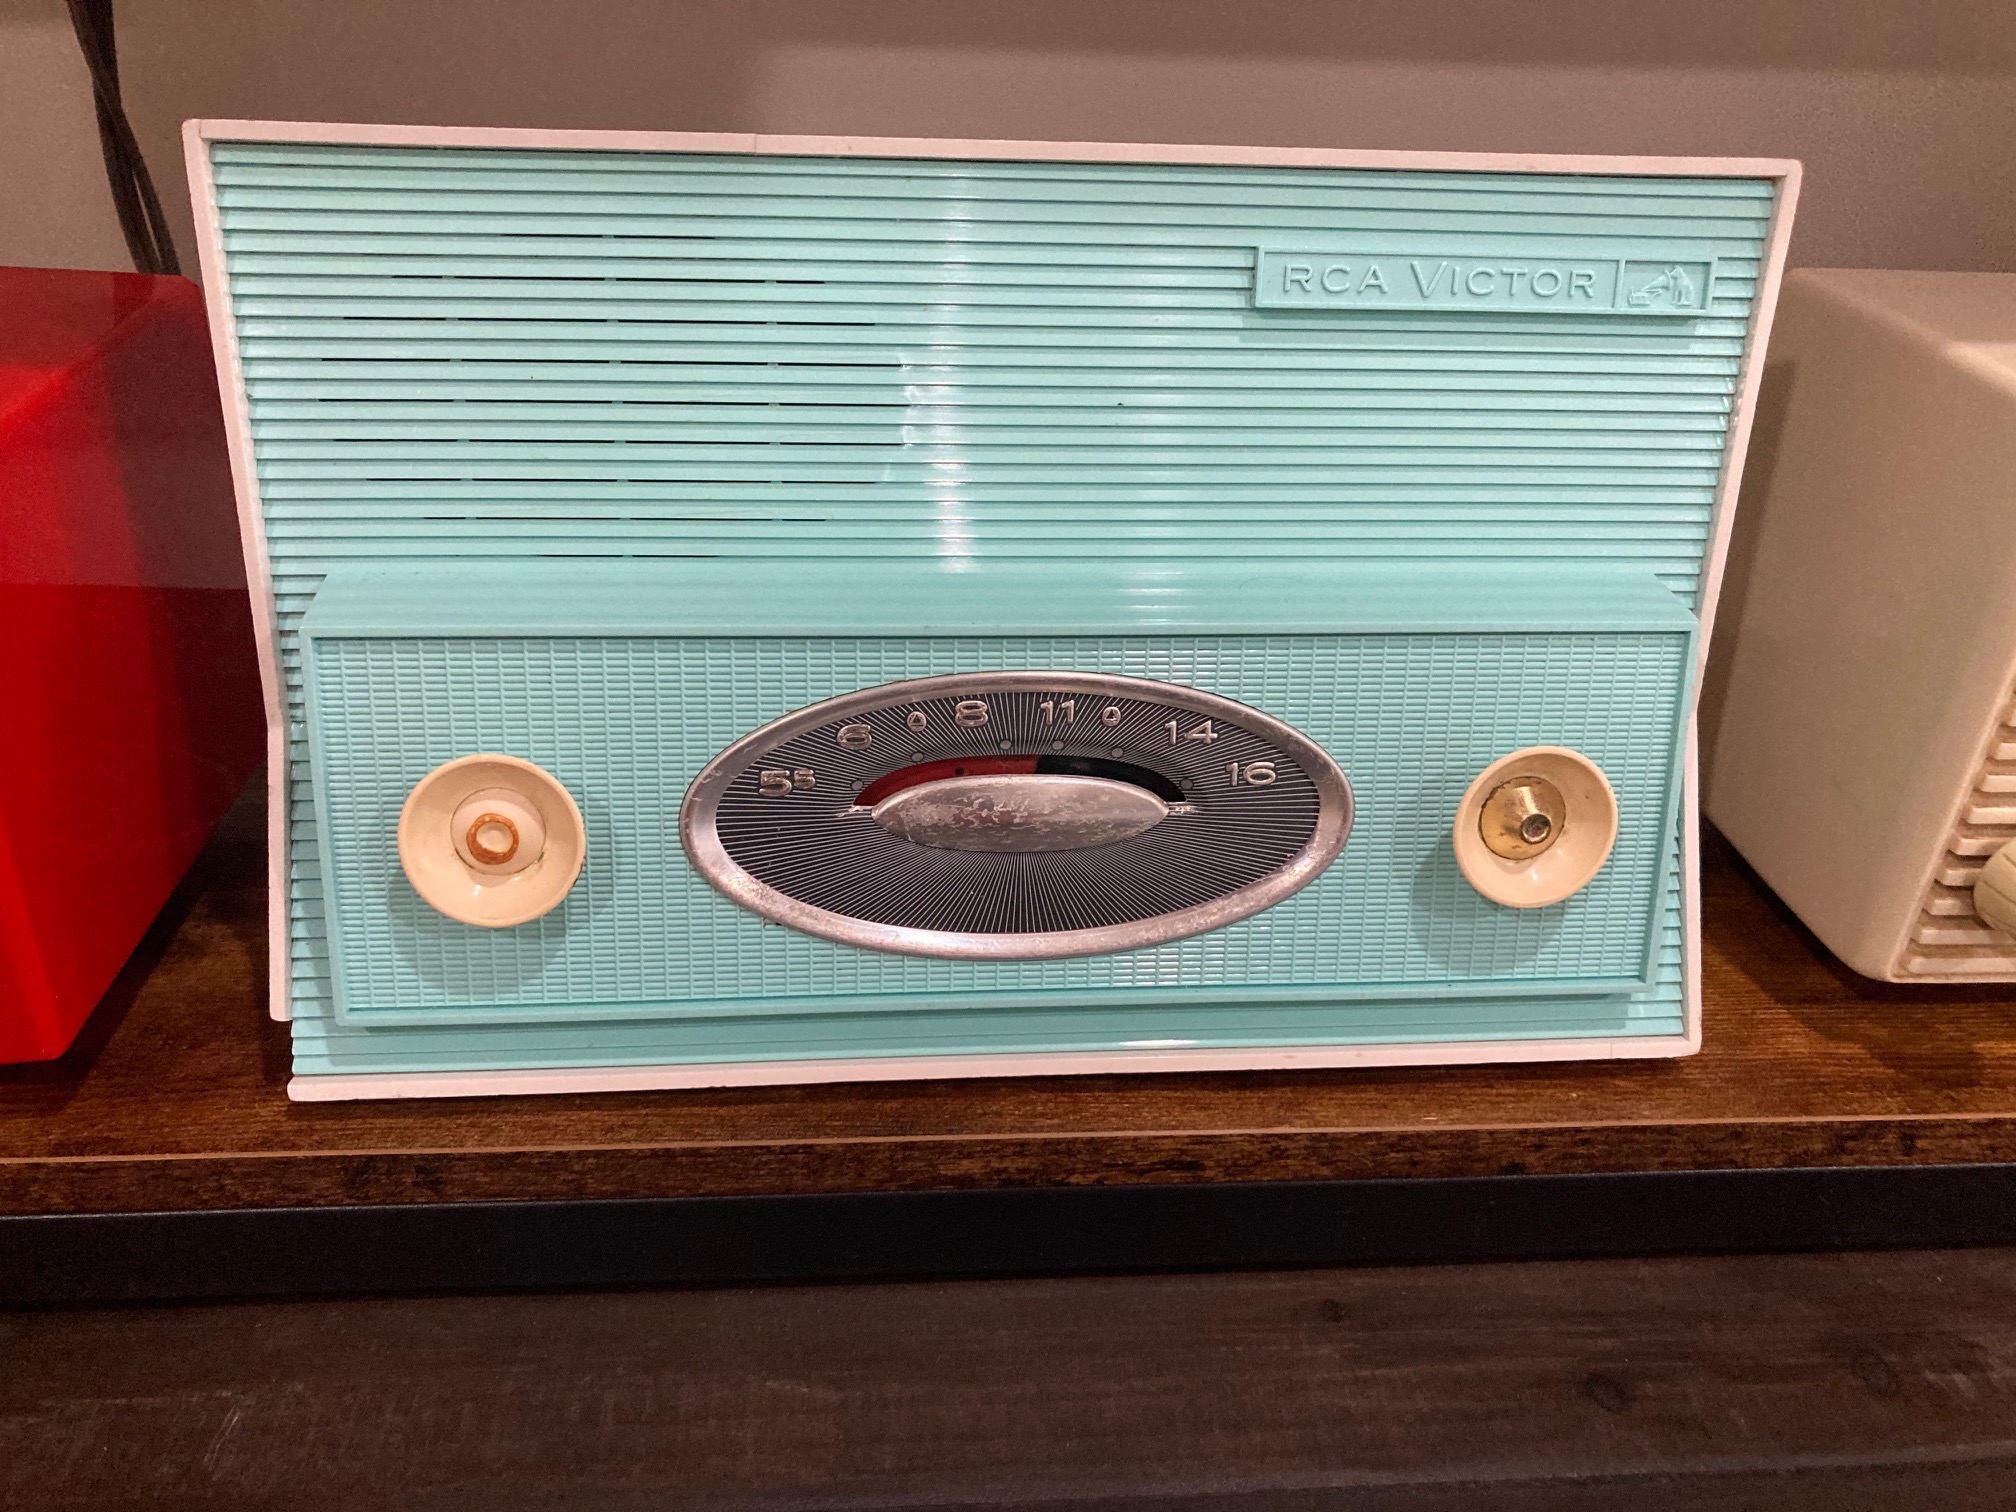 1957 RCA Victor Model 1-RA-55, Turquoise and White,1957